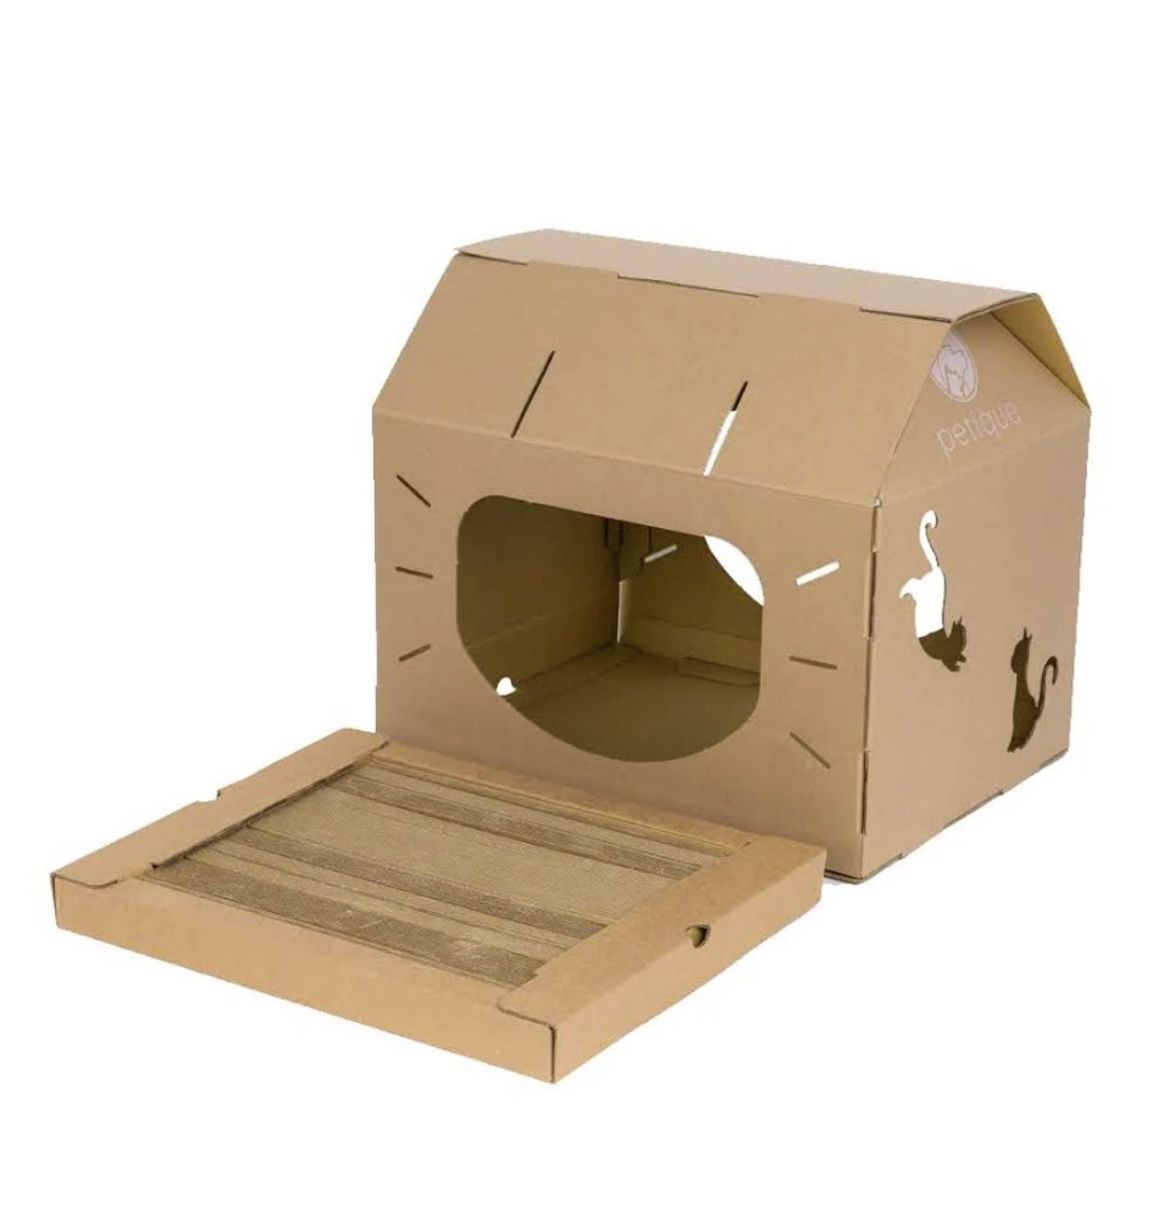 Sustainable pet house with Cat Nip for cats and bunnies